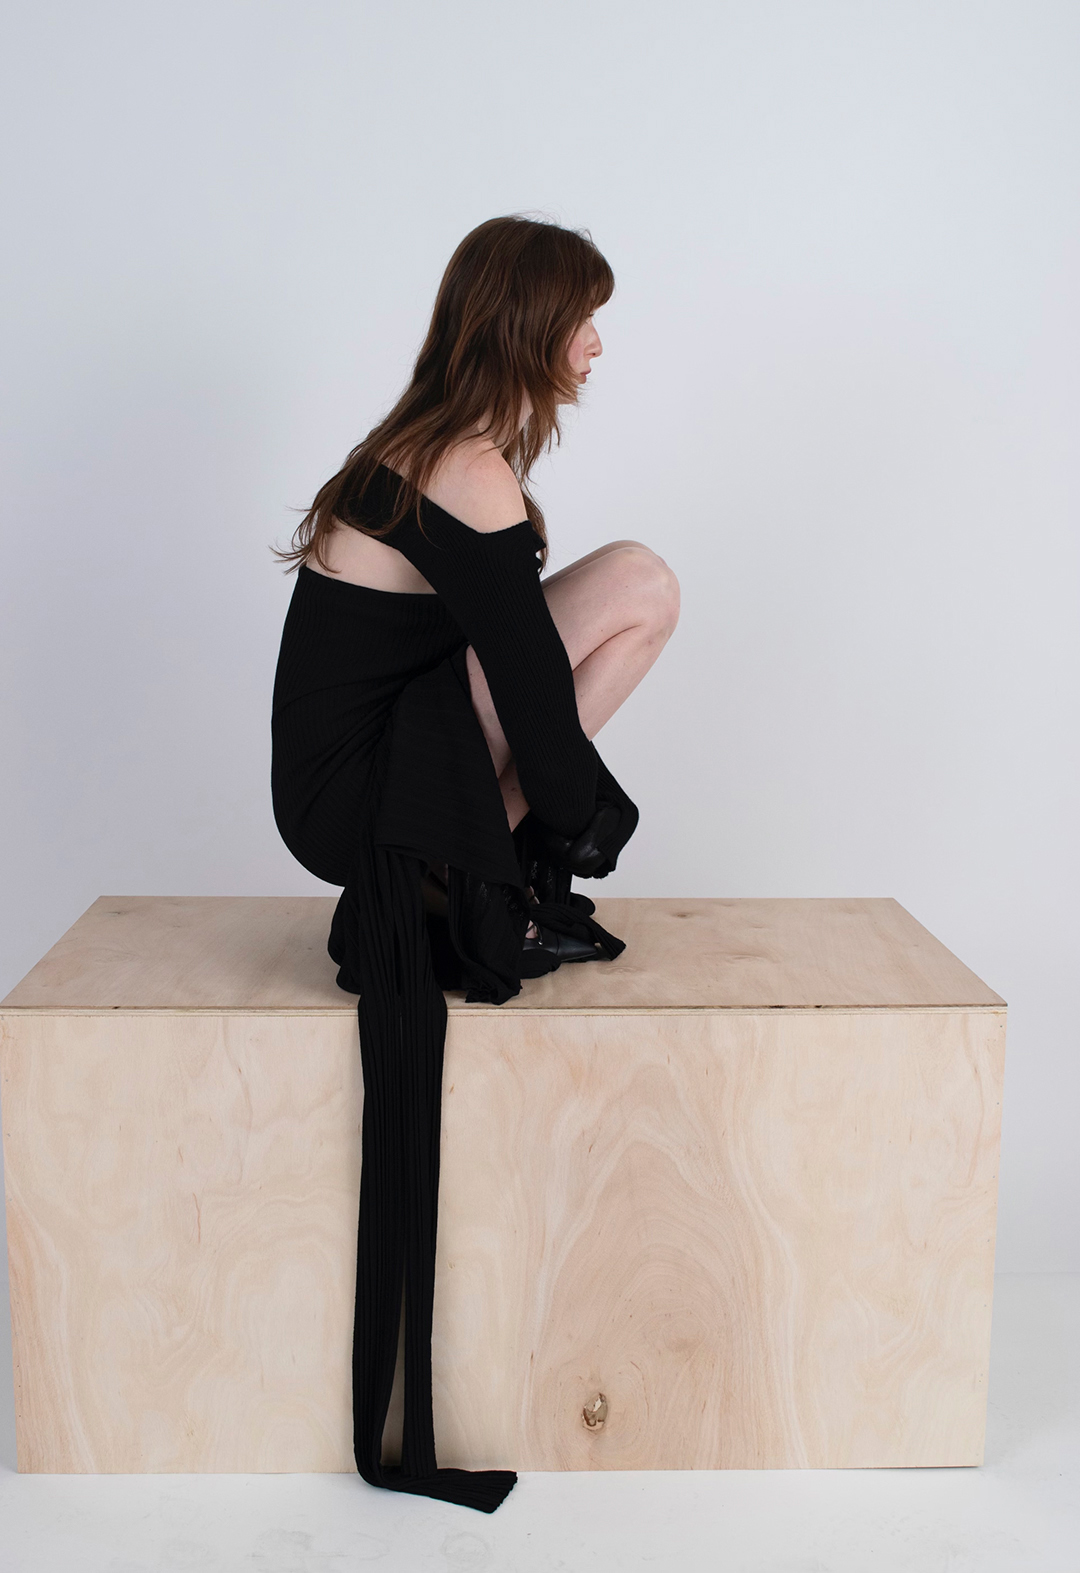 Model sitting down on a piece of wooden block. The model is wearing a black sculpted dress with variegated pleated panels.